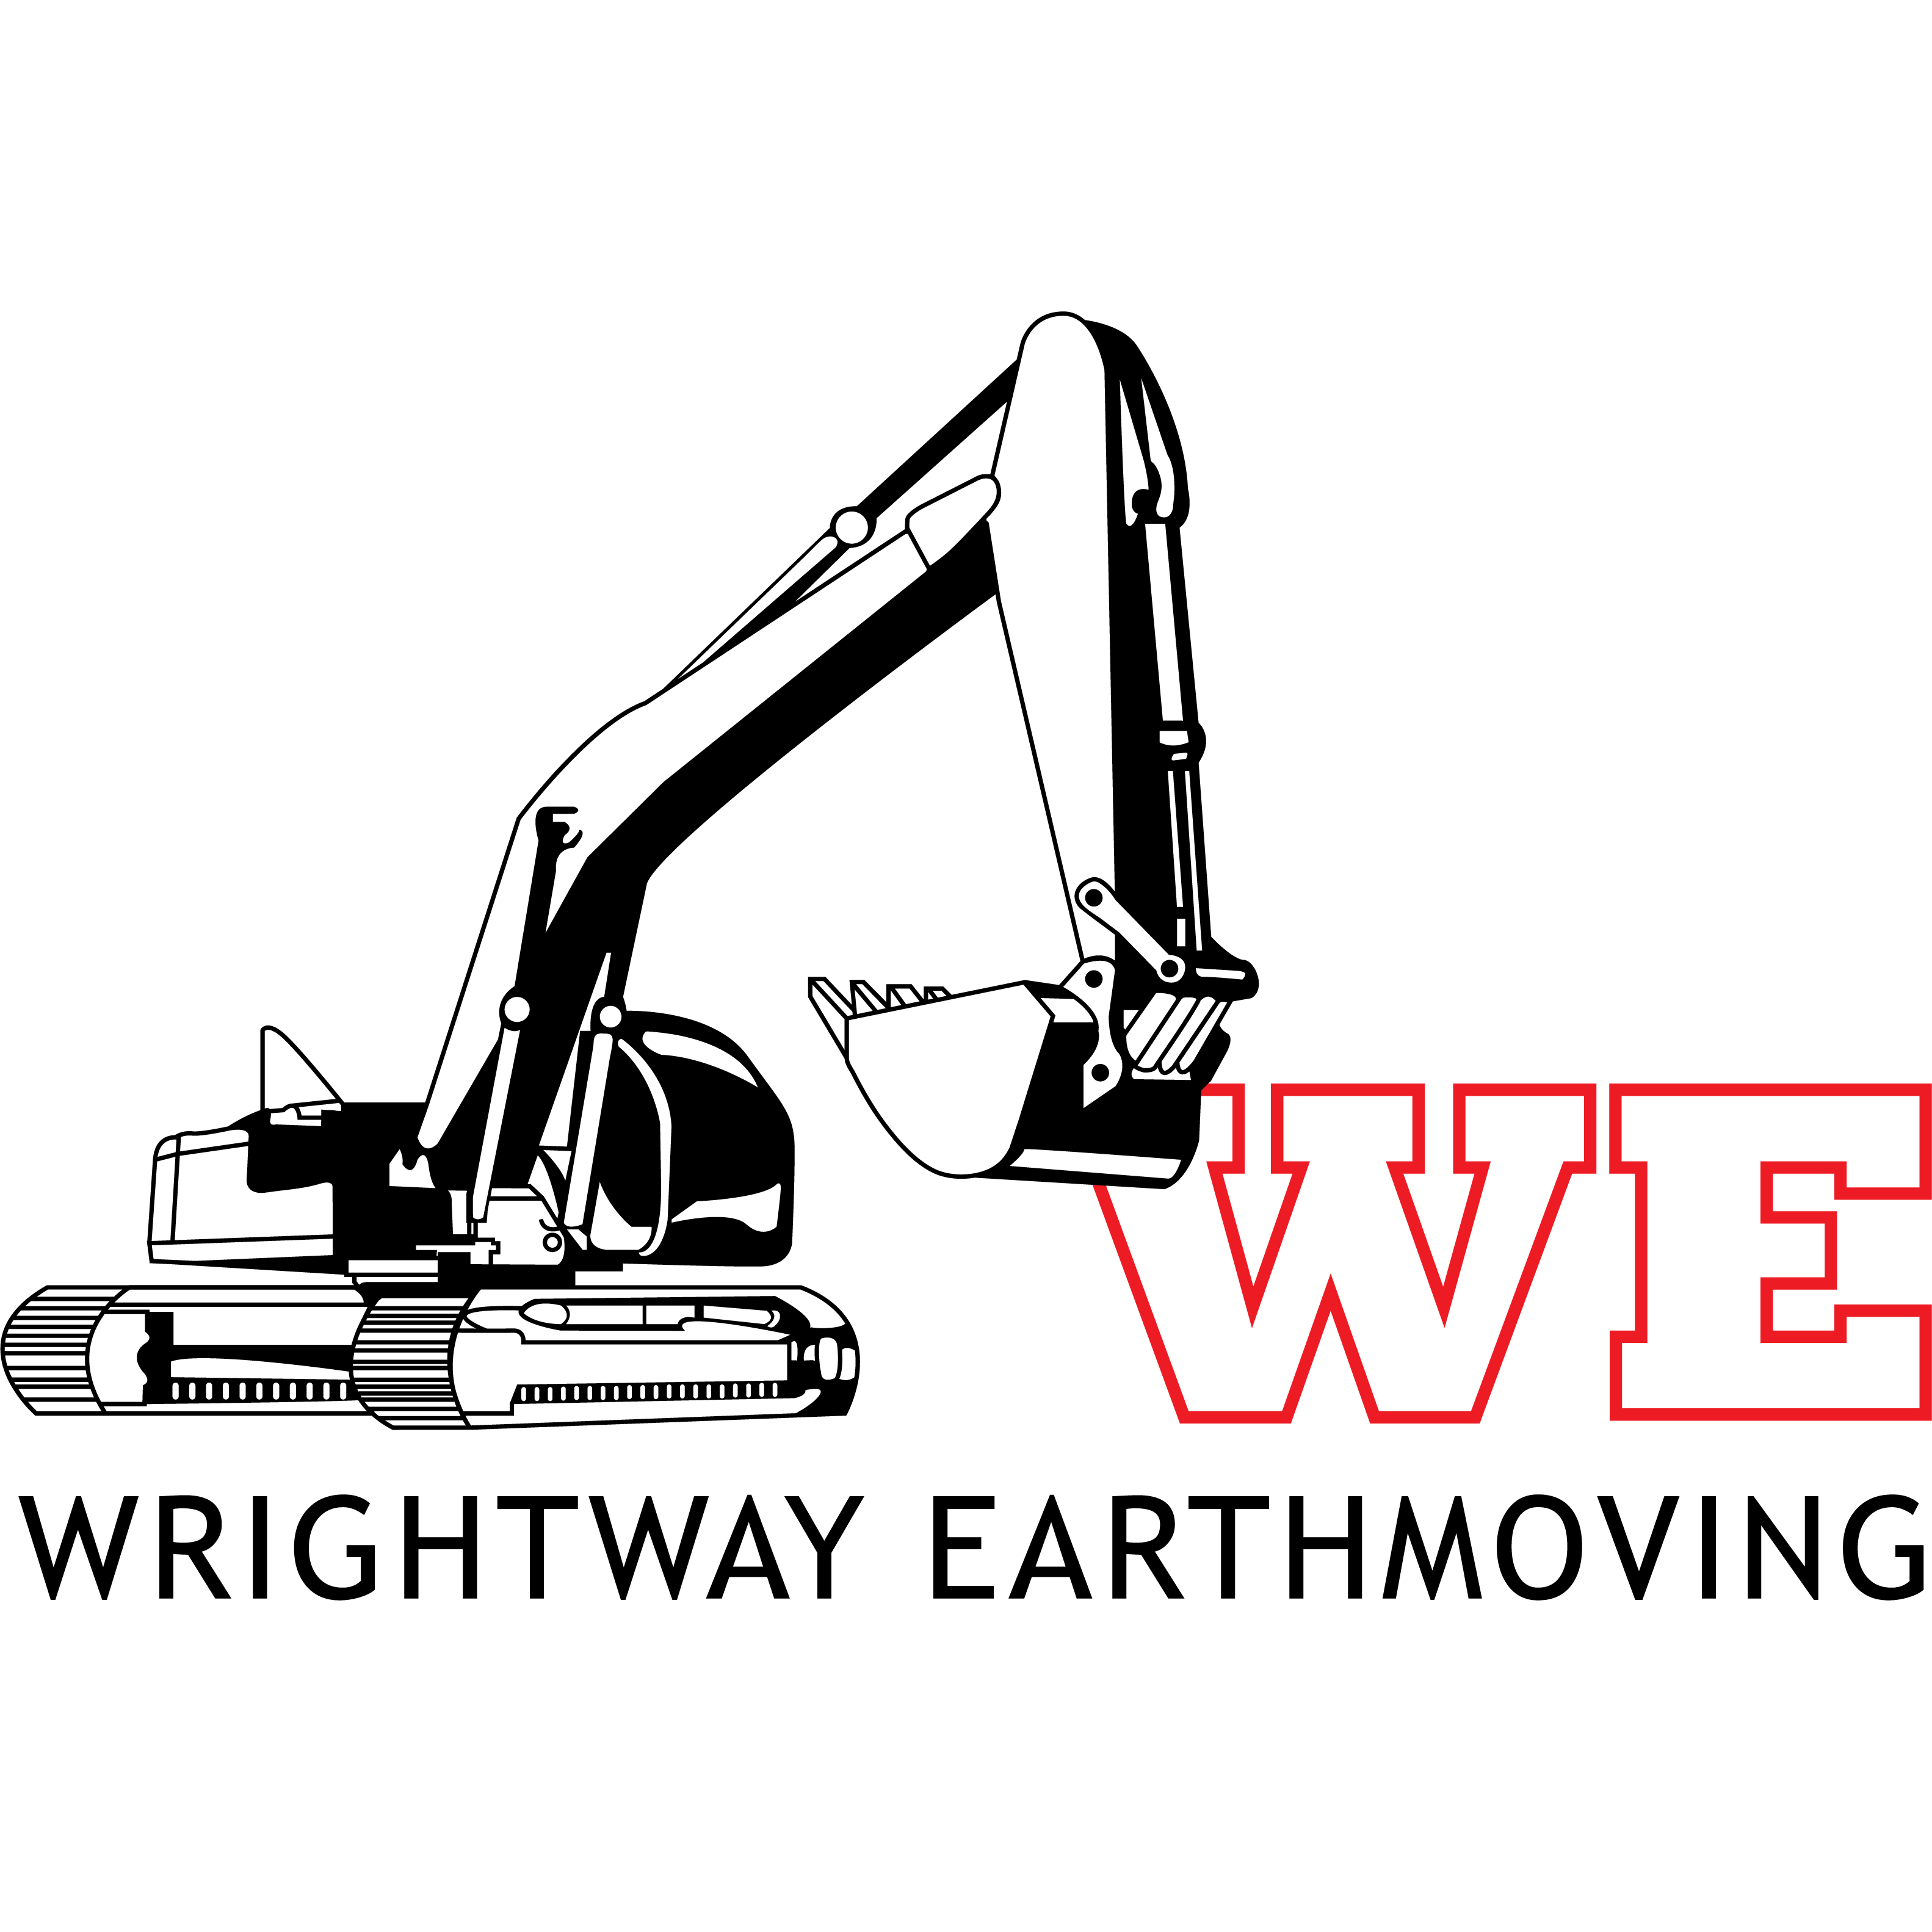 Wrightway Earthmoving - Georges Plains, NSW 2795 - 0456 760 077 | ShowMeLocal.com